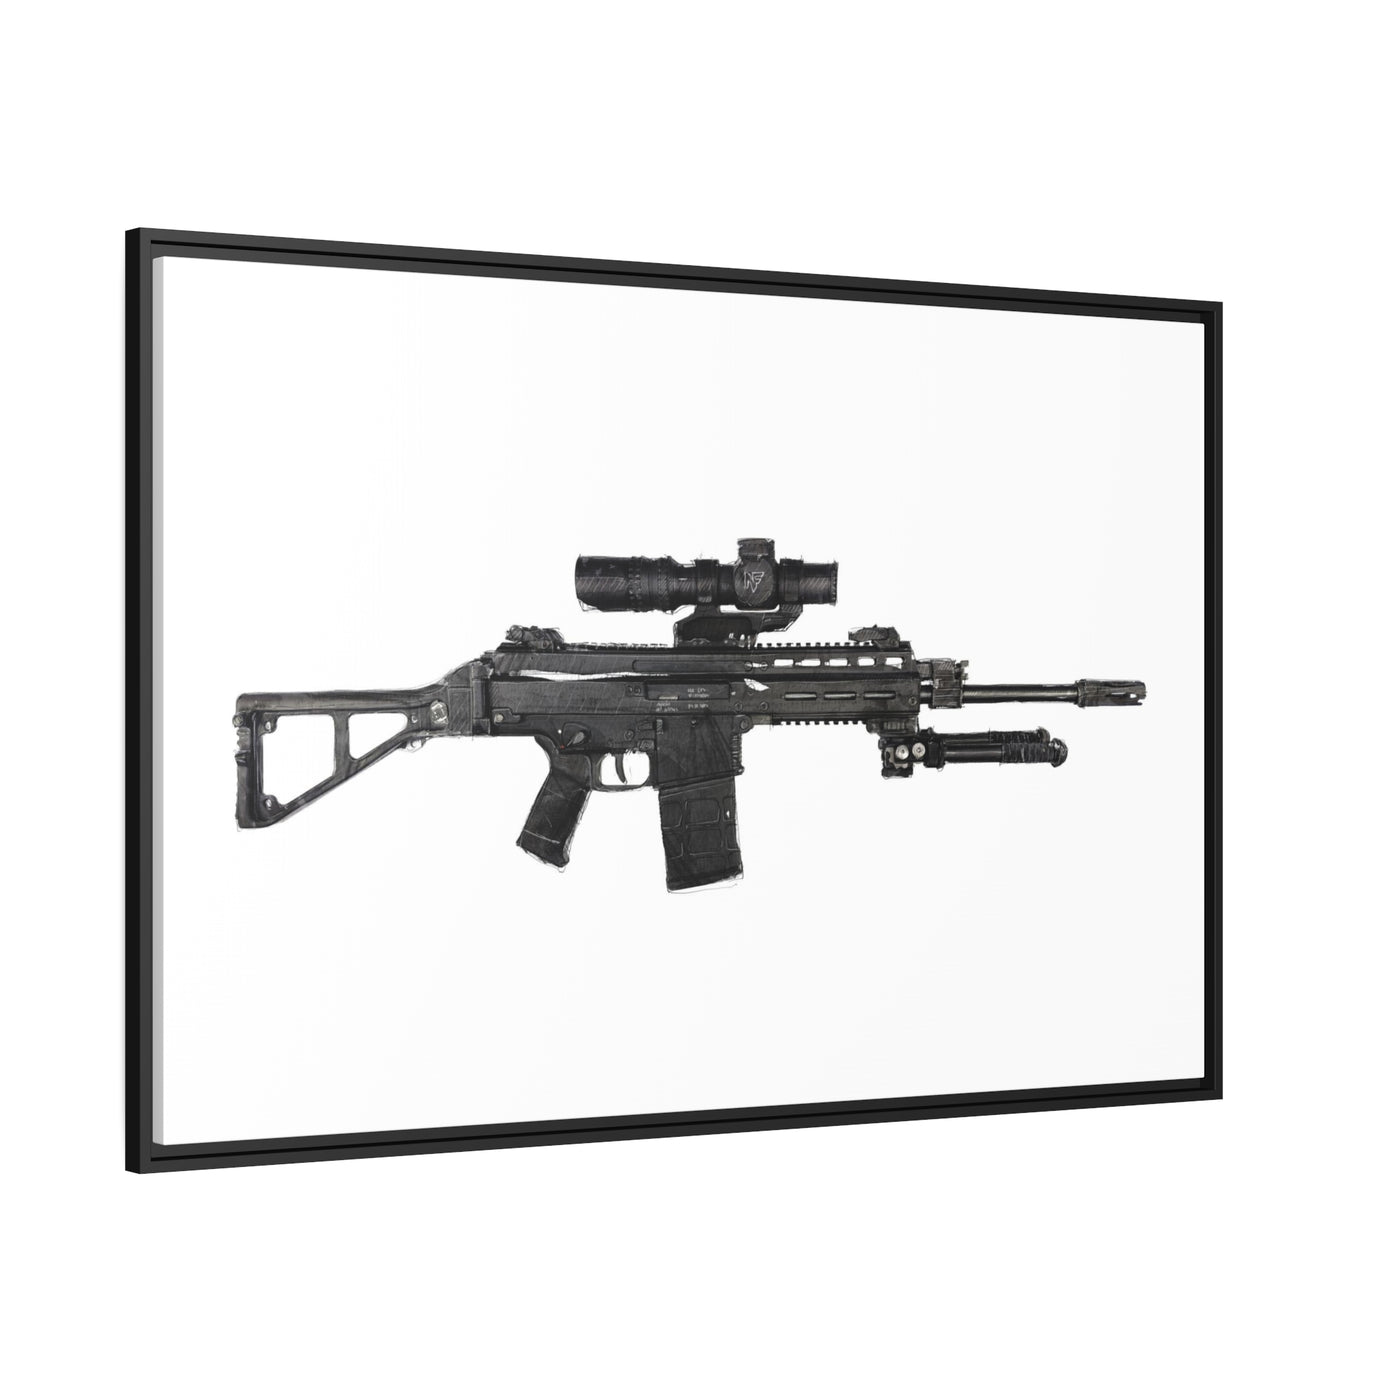 The Urban Sniper Painting - Just The Piece - Black Framed Wrapped Canvas - Value Collection